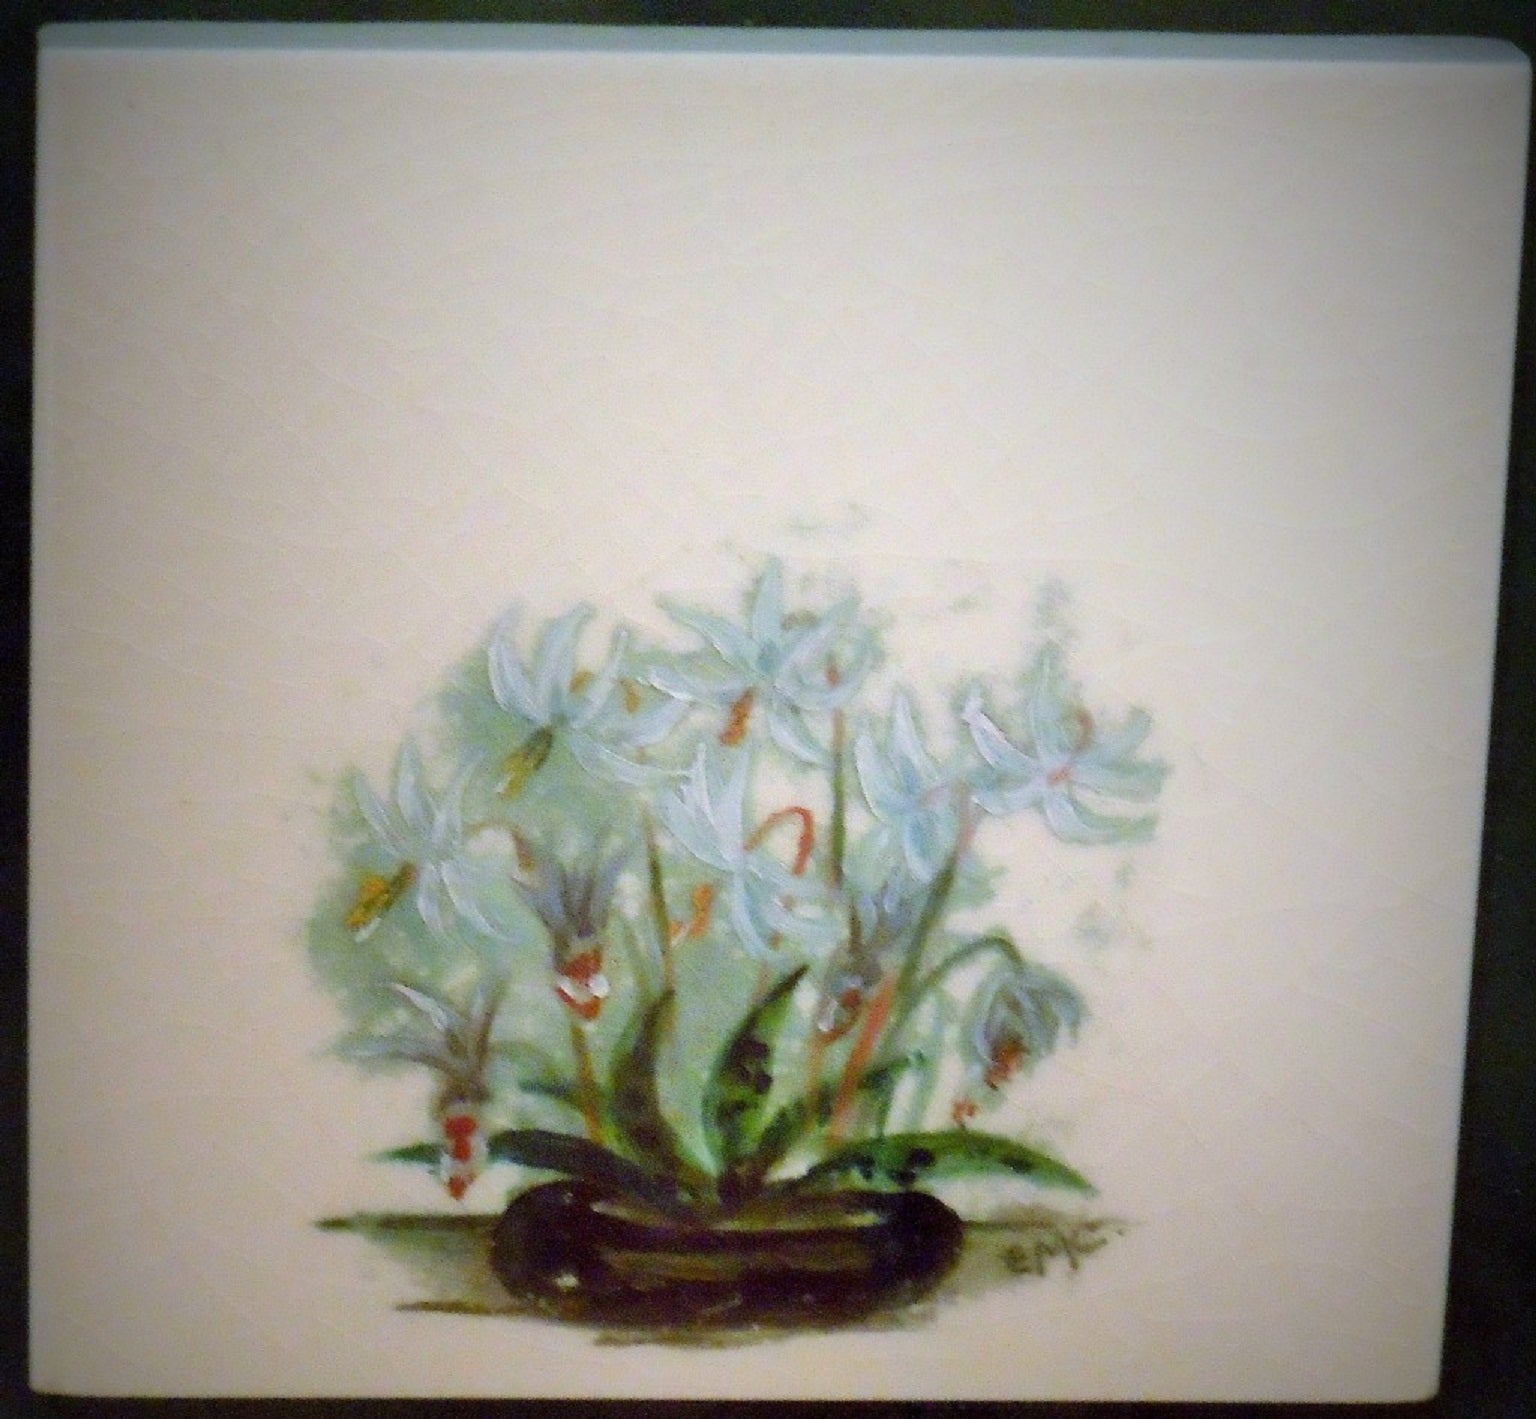 Wild Lilies on Tile Painting by Emily Carr, 1893, Canada